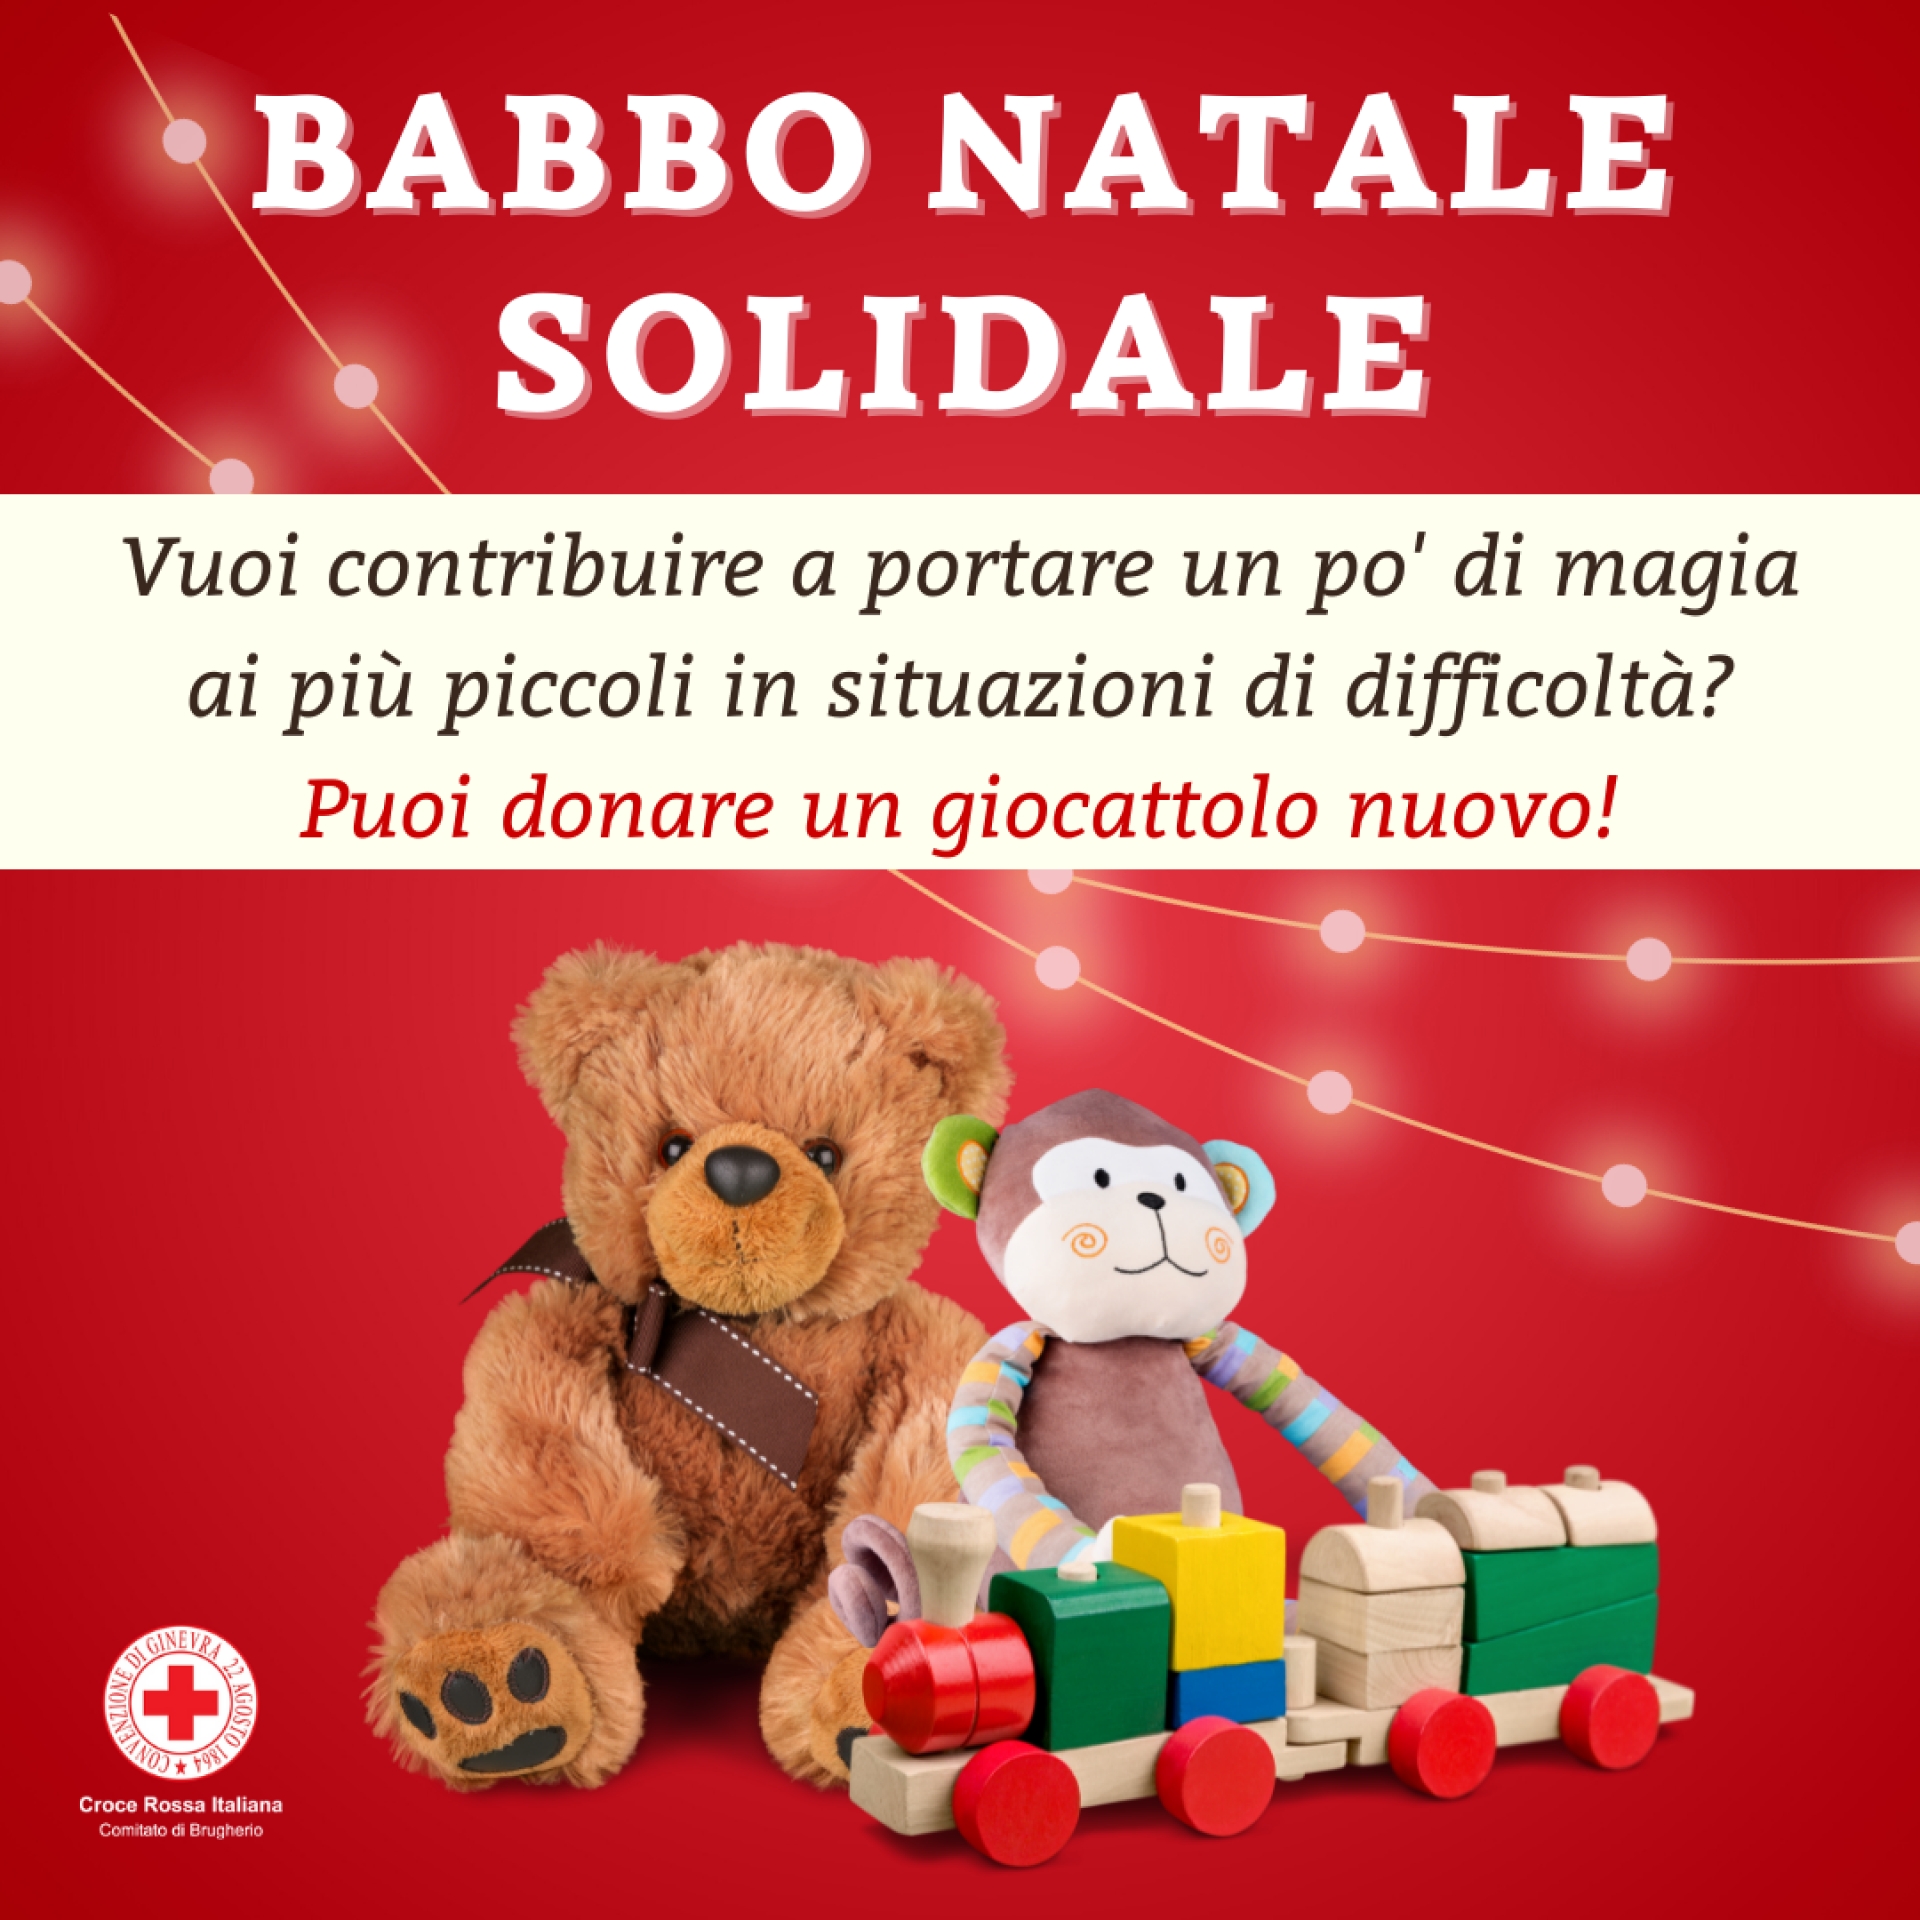 Babbo Natale Solidale